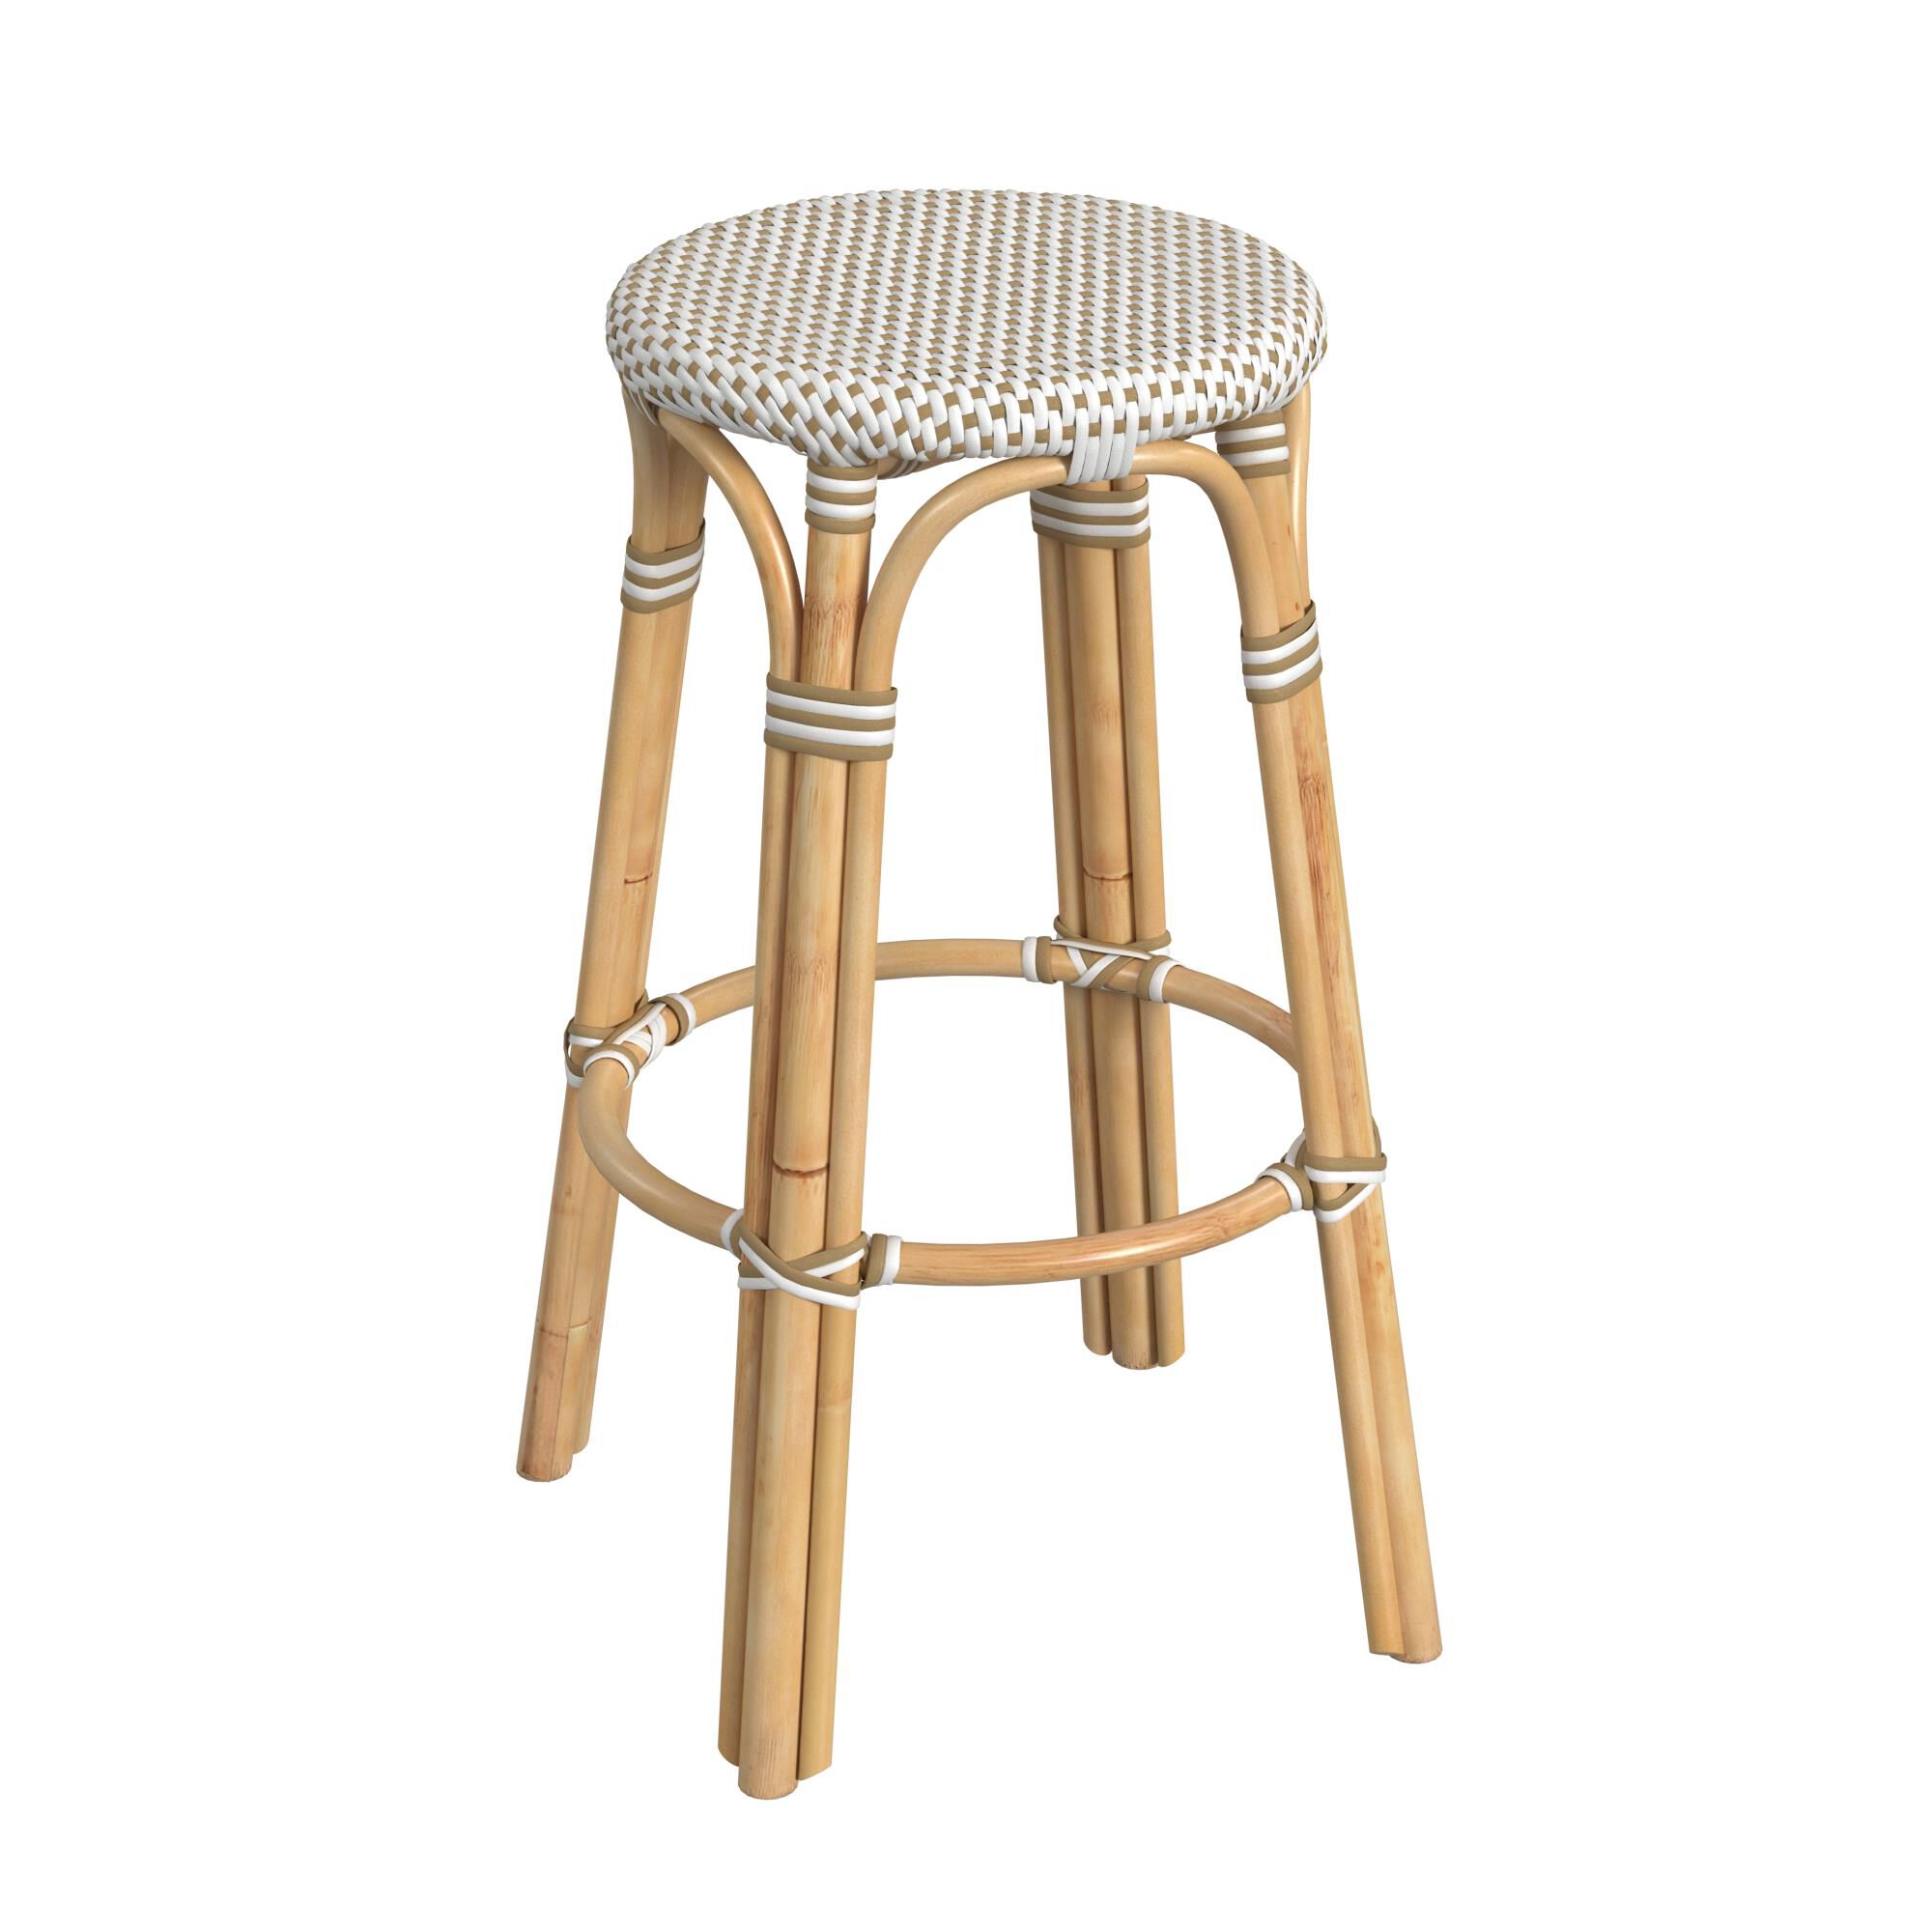 Photos - Chair Butler Specialty Company Tobias Stool Tobias - 9370415 - Transitional 9370